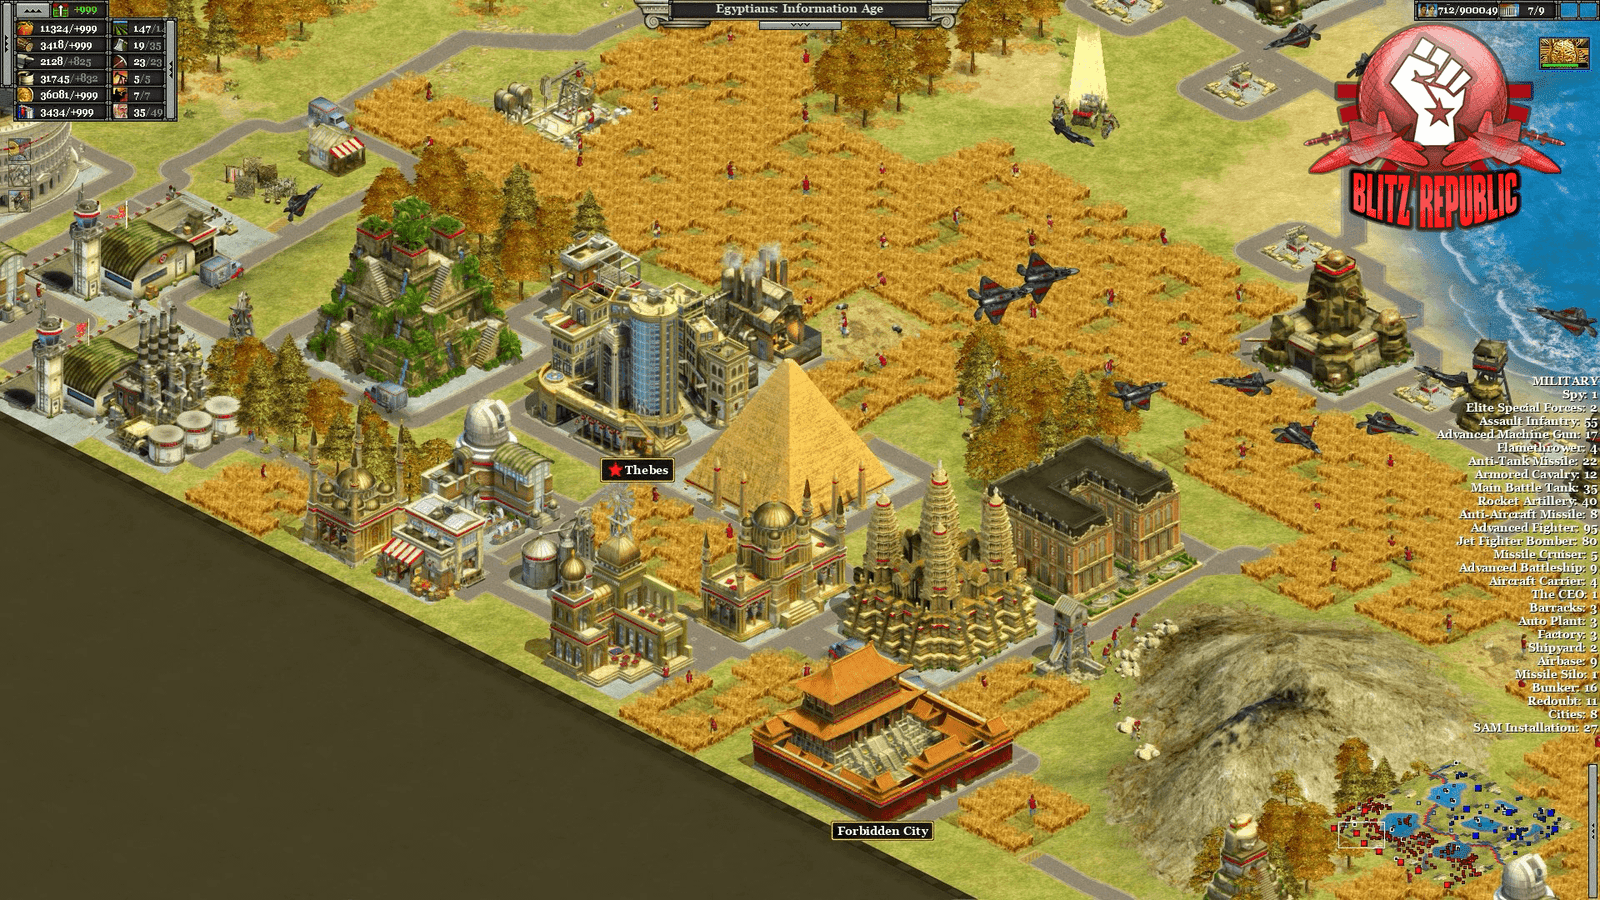 Blitz Republic Rise of Nations Mod ready for August 2021 release